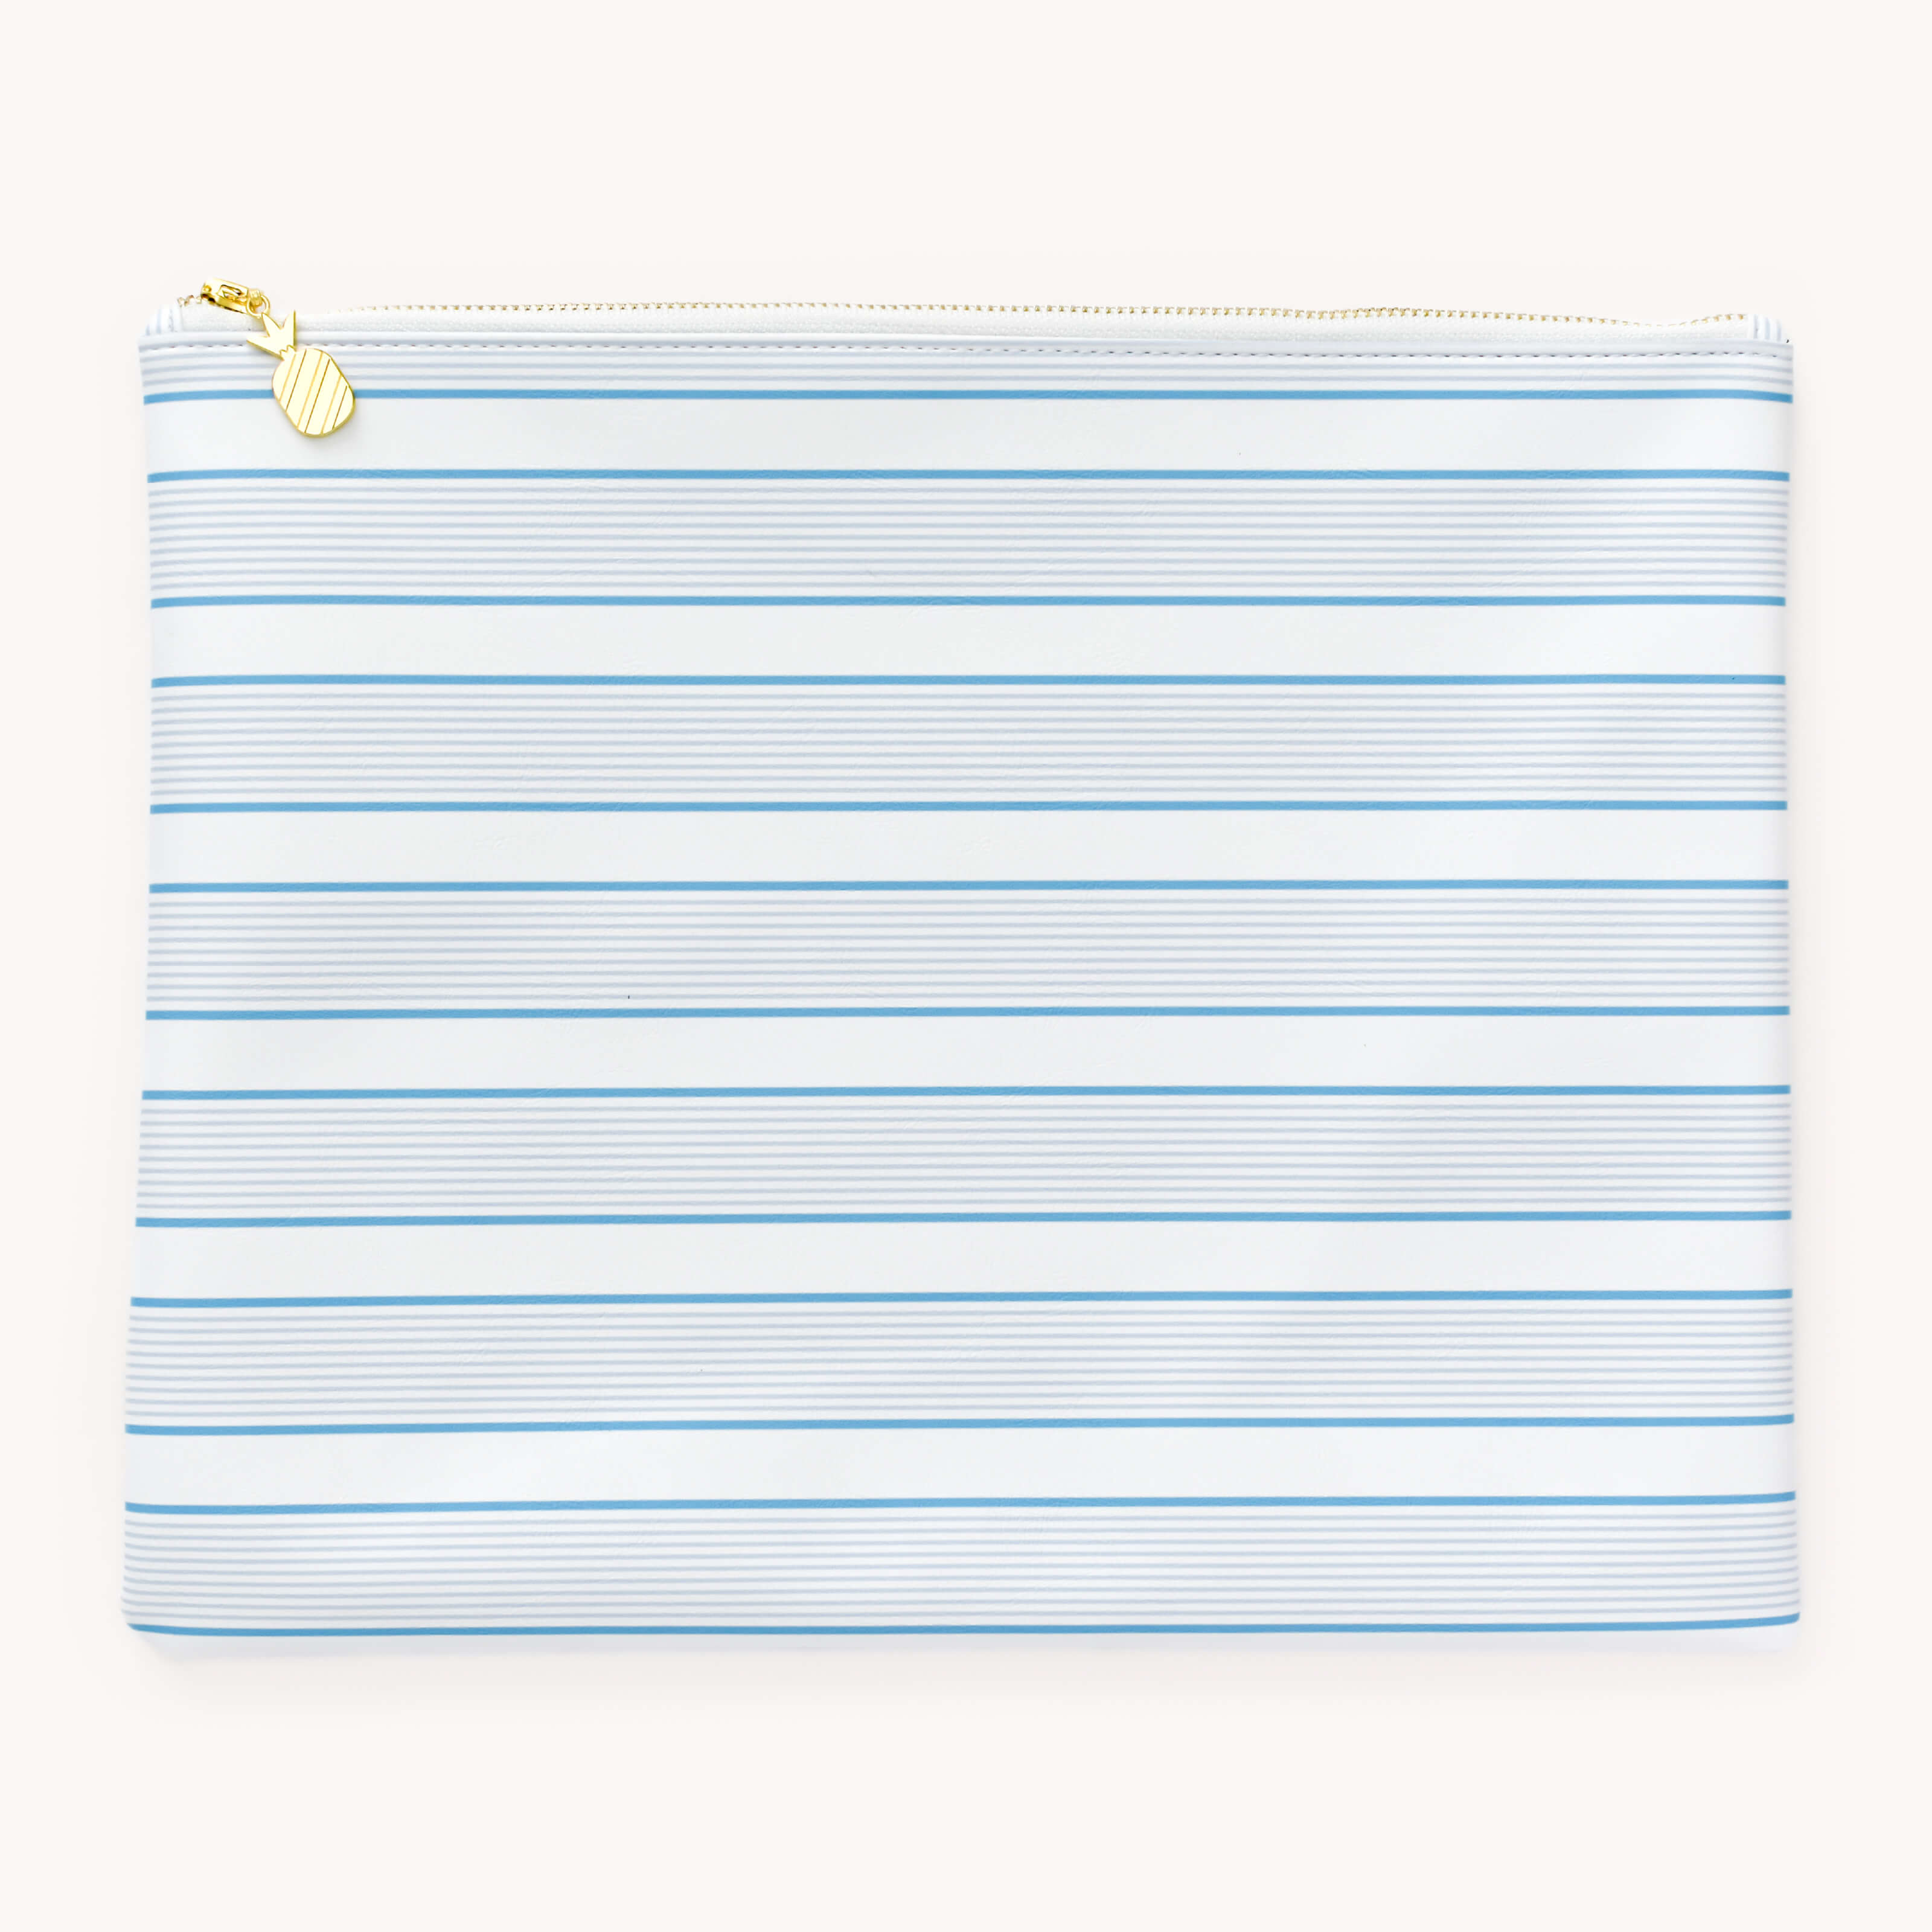 Planner Pouch, Dandelion Stripe – Simplified® by Emily Ley